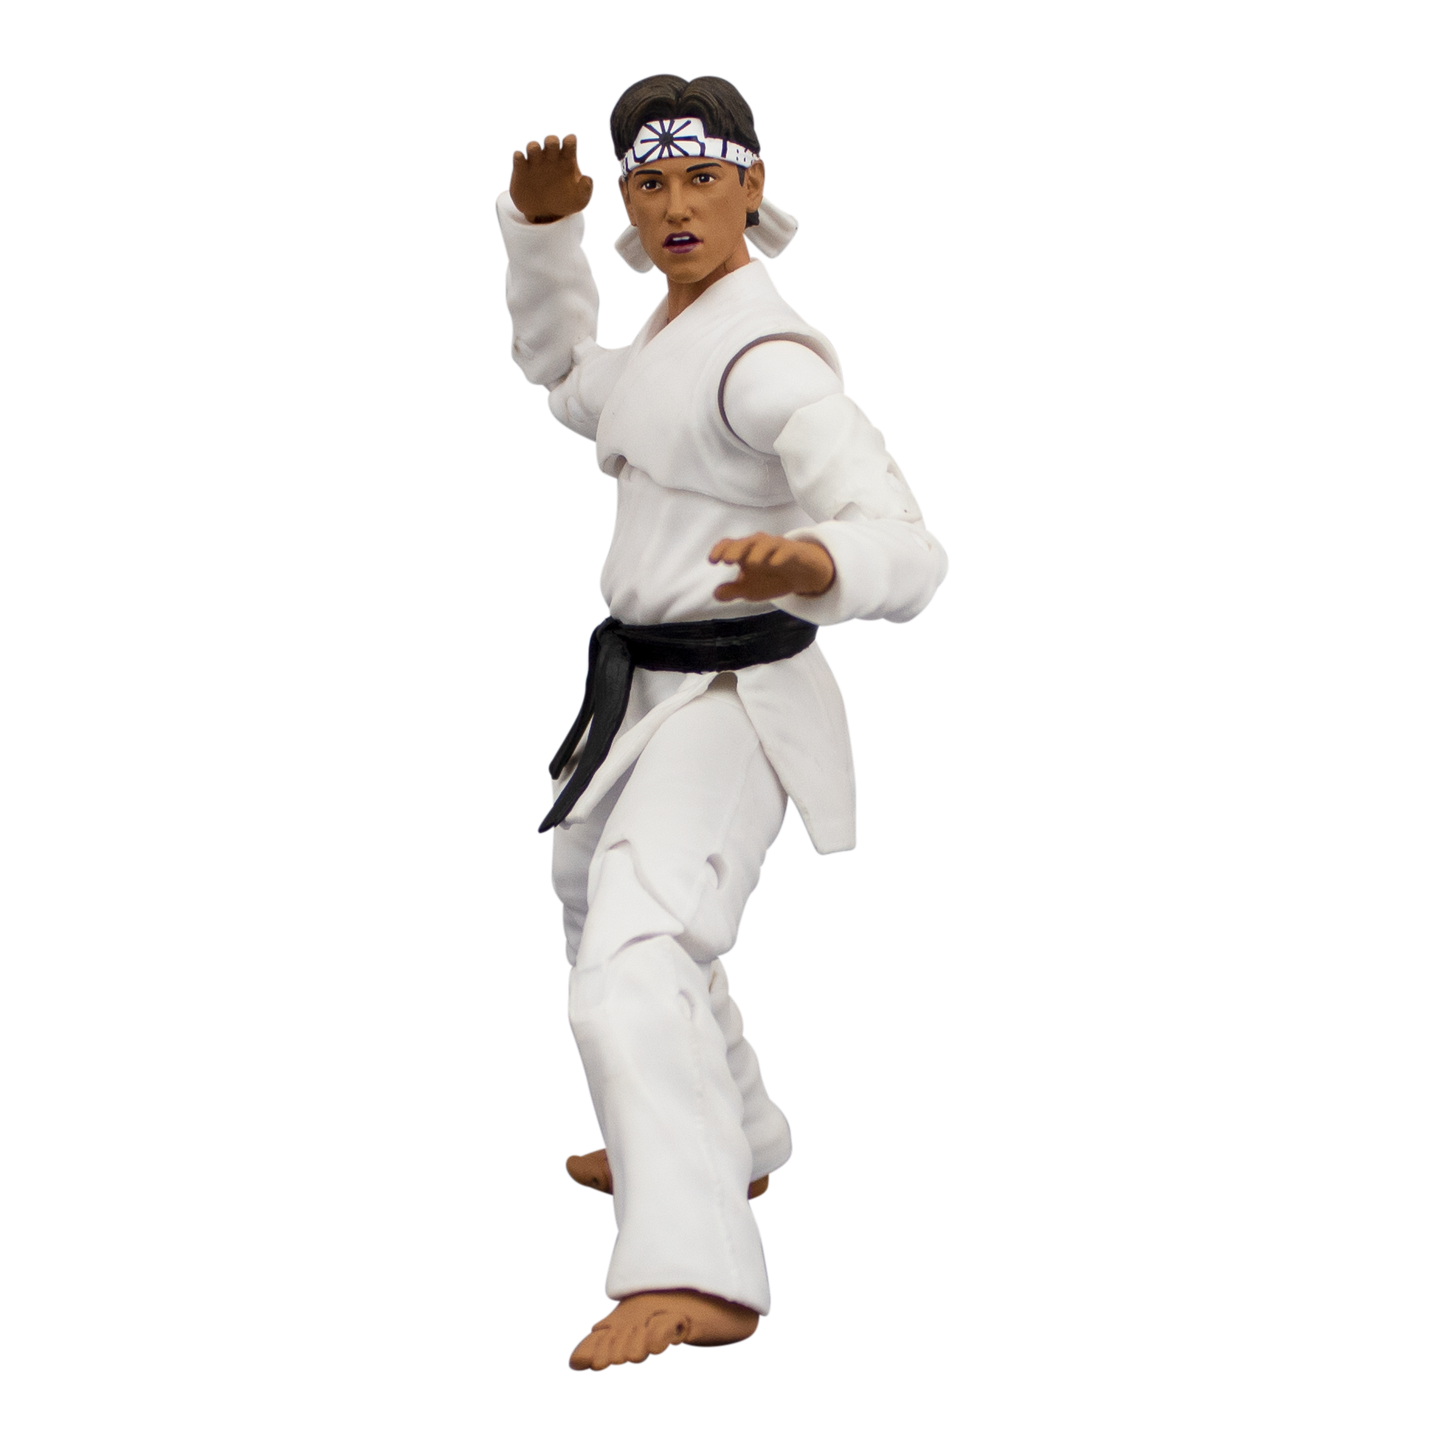 The Karate Kid Daniel Larusso Action Figure - Available 3rd Quarter 2021 - Icon Heroes 